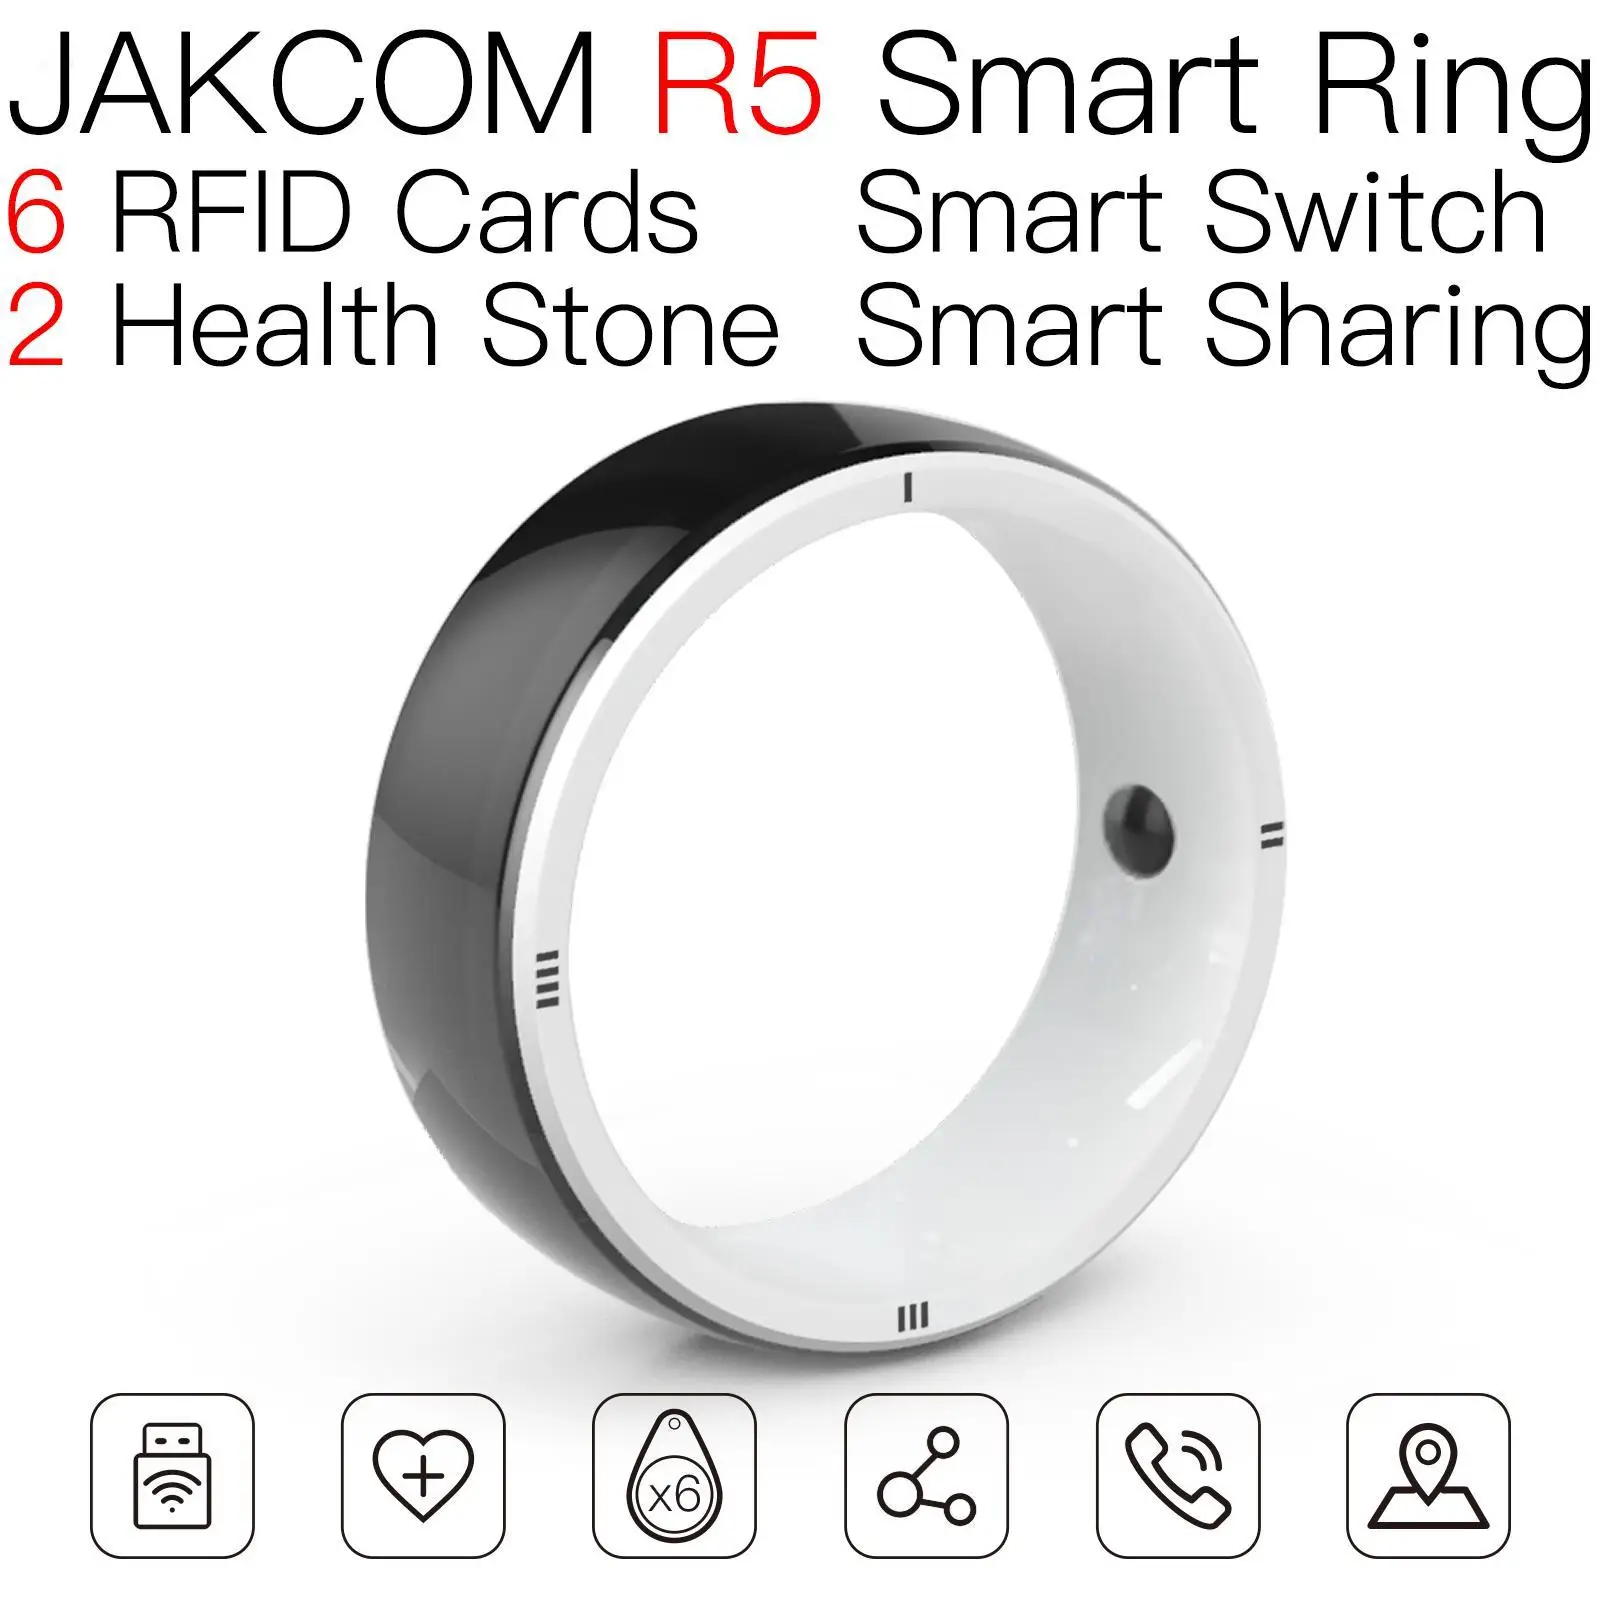 

JAKCOM R5 Smart Ring better than tag rfid nfc asic s19 pet chip reader galaxy smartag prime 12 mois write read 868 mhz